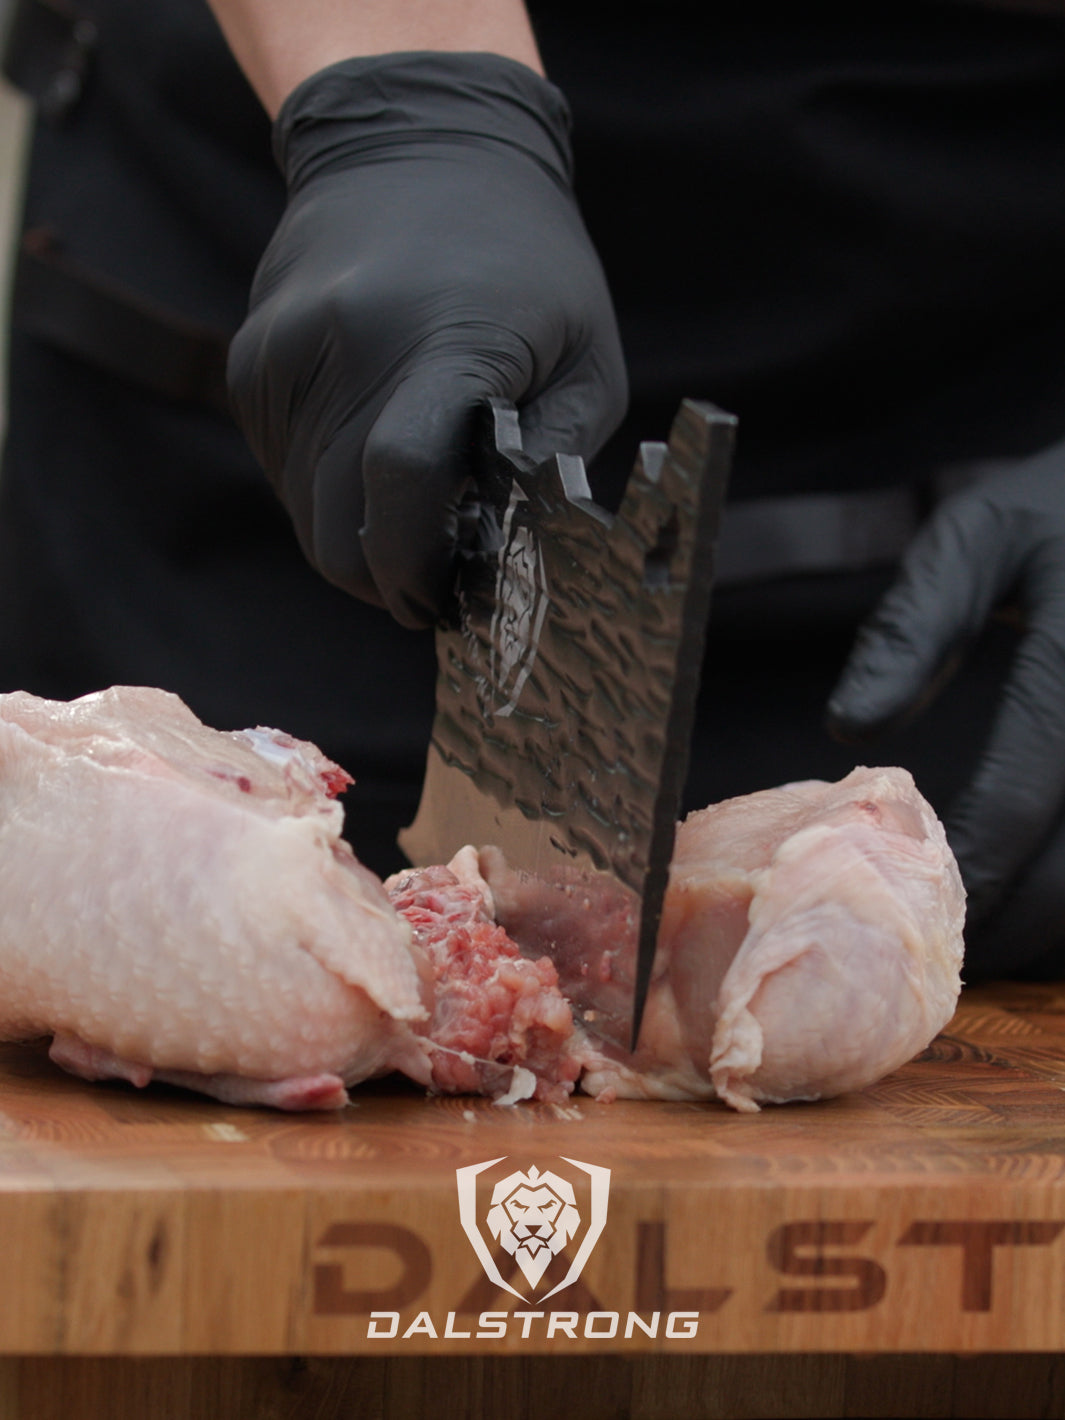 Dalstrong barbarian series obliterator cleaver knife with a chicken cut in half.